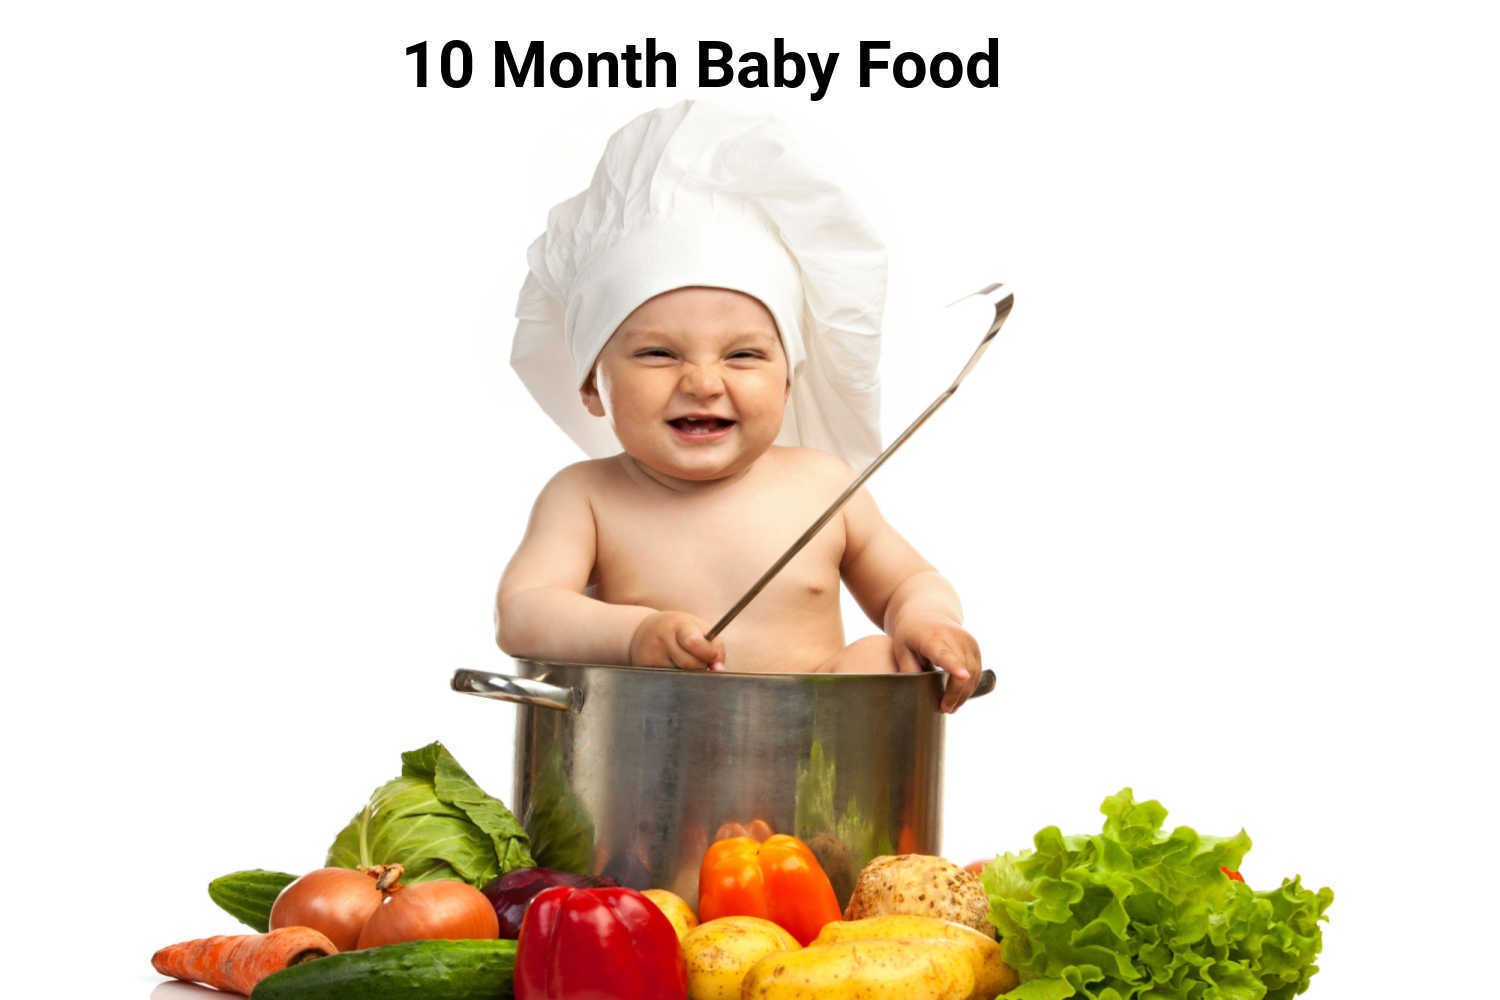 10 Month Baby Food – What to Give, What Not to Give and Sample Schedule